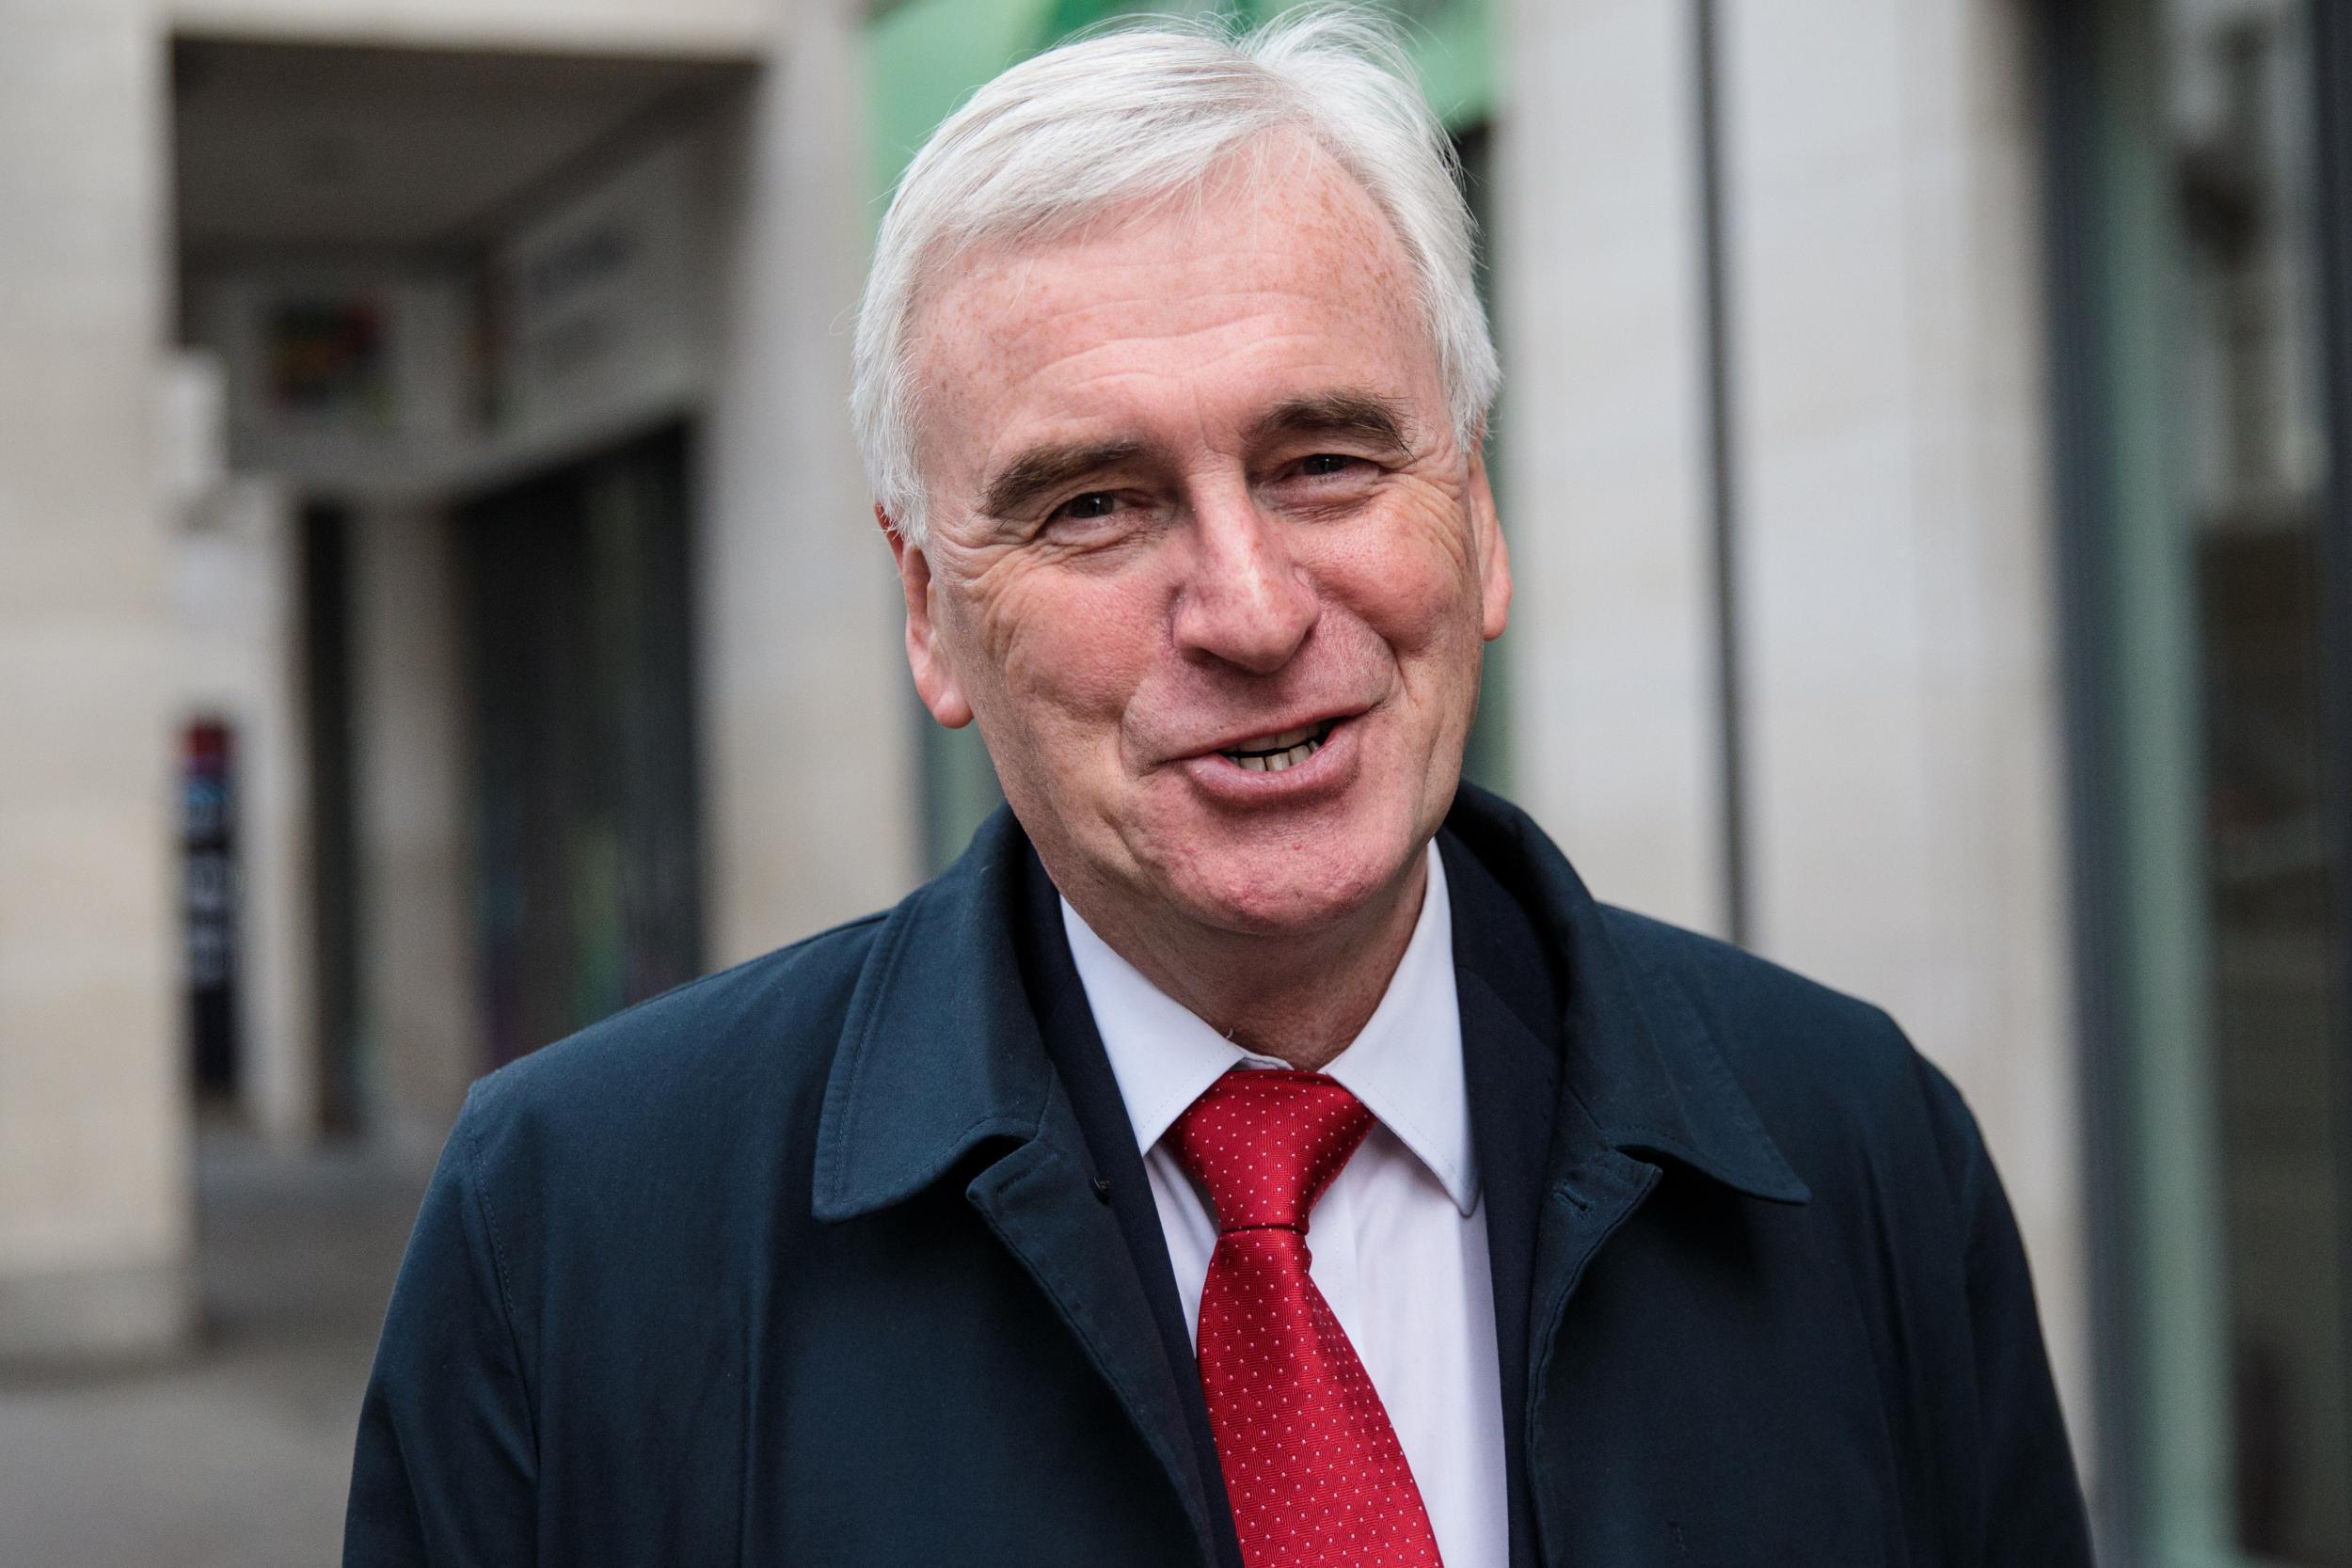 The shadow Chancellor, John McDonnell, first announced plans to invest £250bn almost a year ago